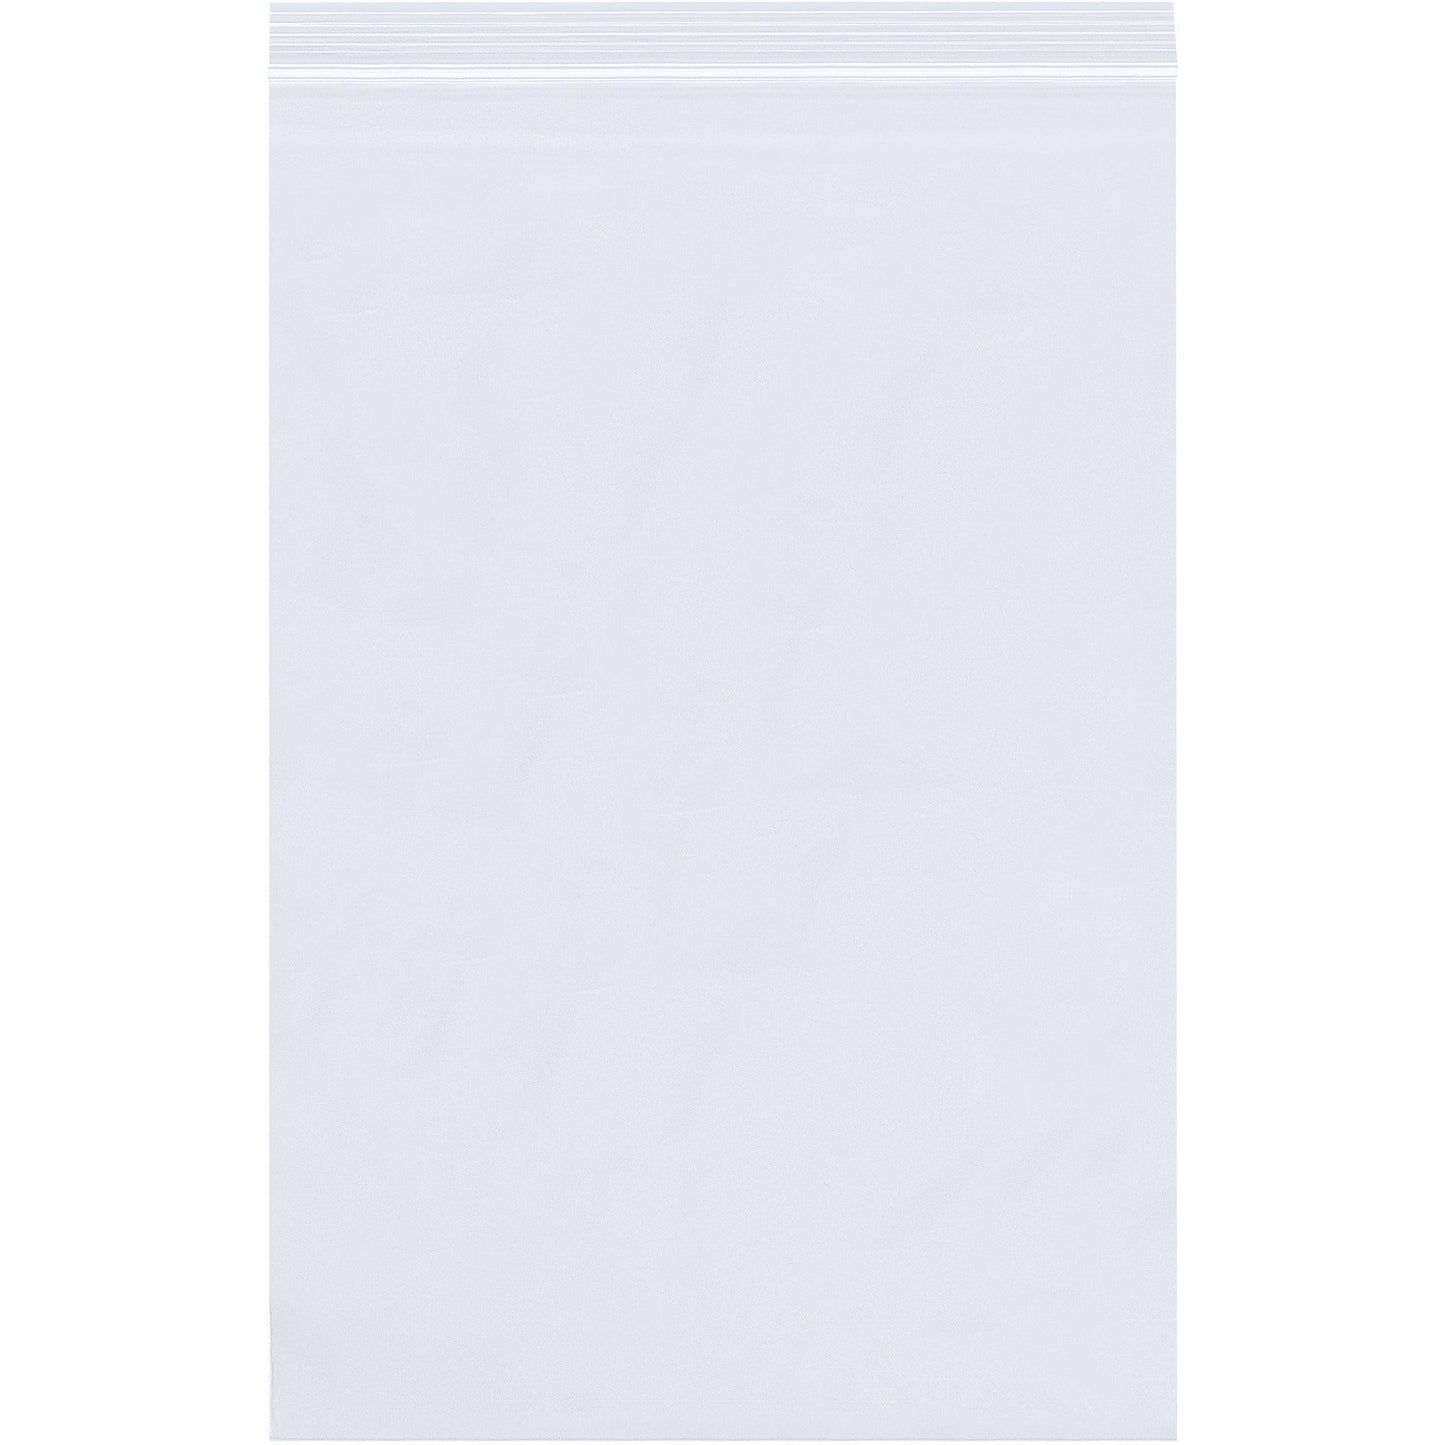 3 x 2" - 2 Mil Reclosable Poly Bags - PB3522